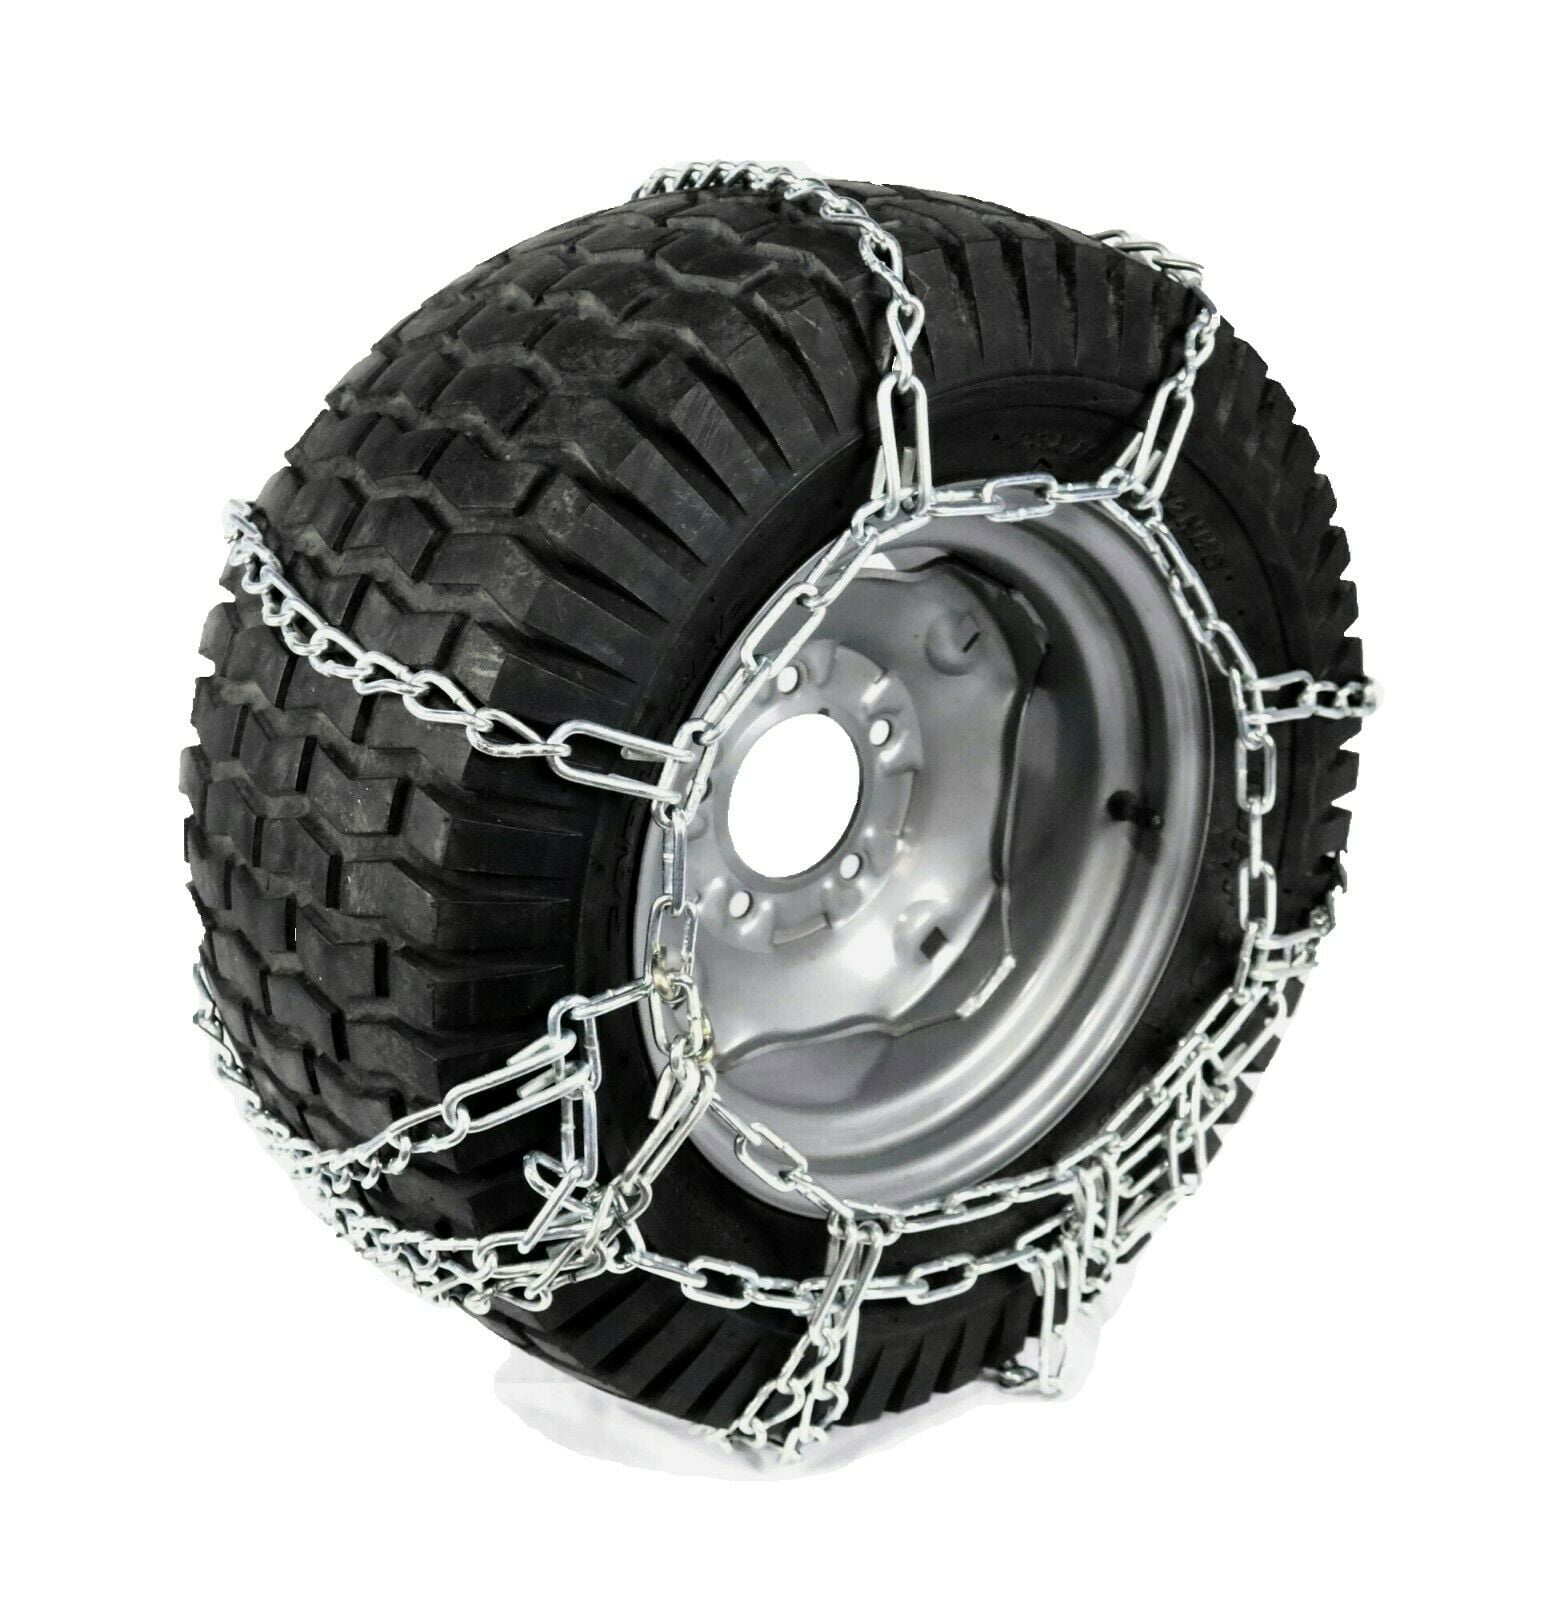 PAIR 2 Link TIRE CHAINS 23x10.50-12 for Simplicty Lawn Mower Garden Tractor Ride 